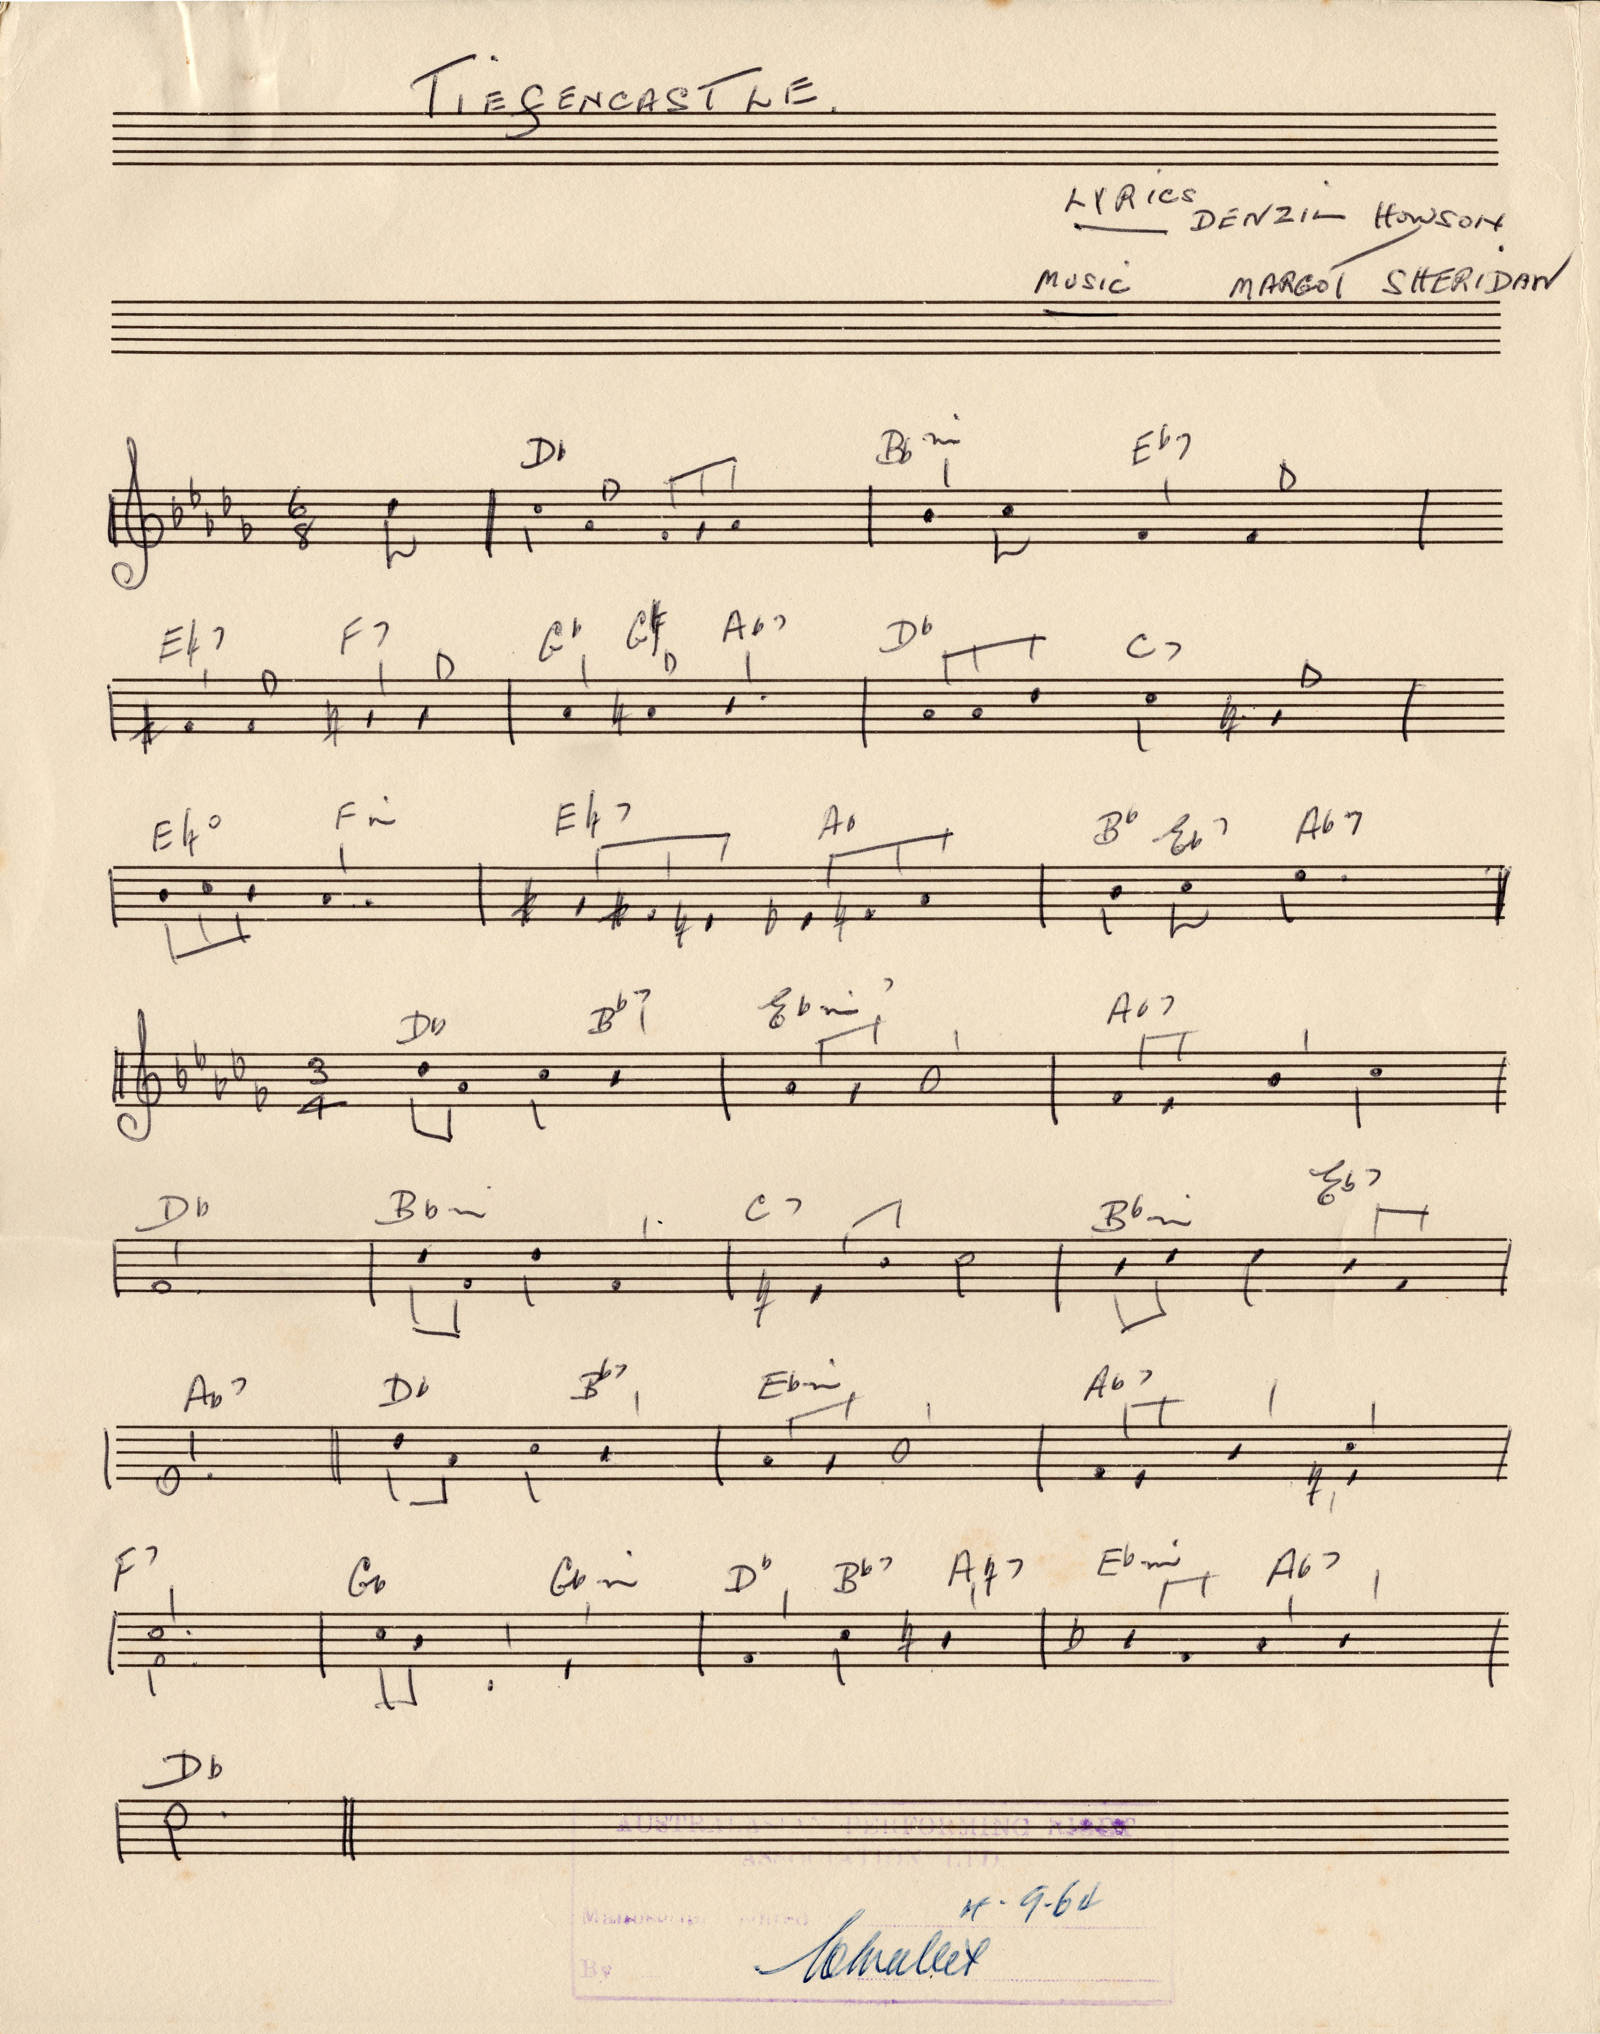 music score of “Tiefencastel (in the Snow)” song